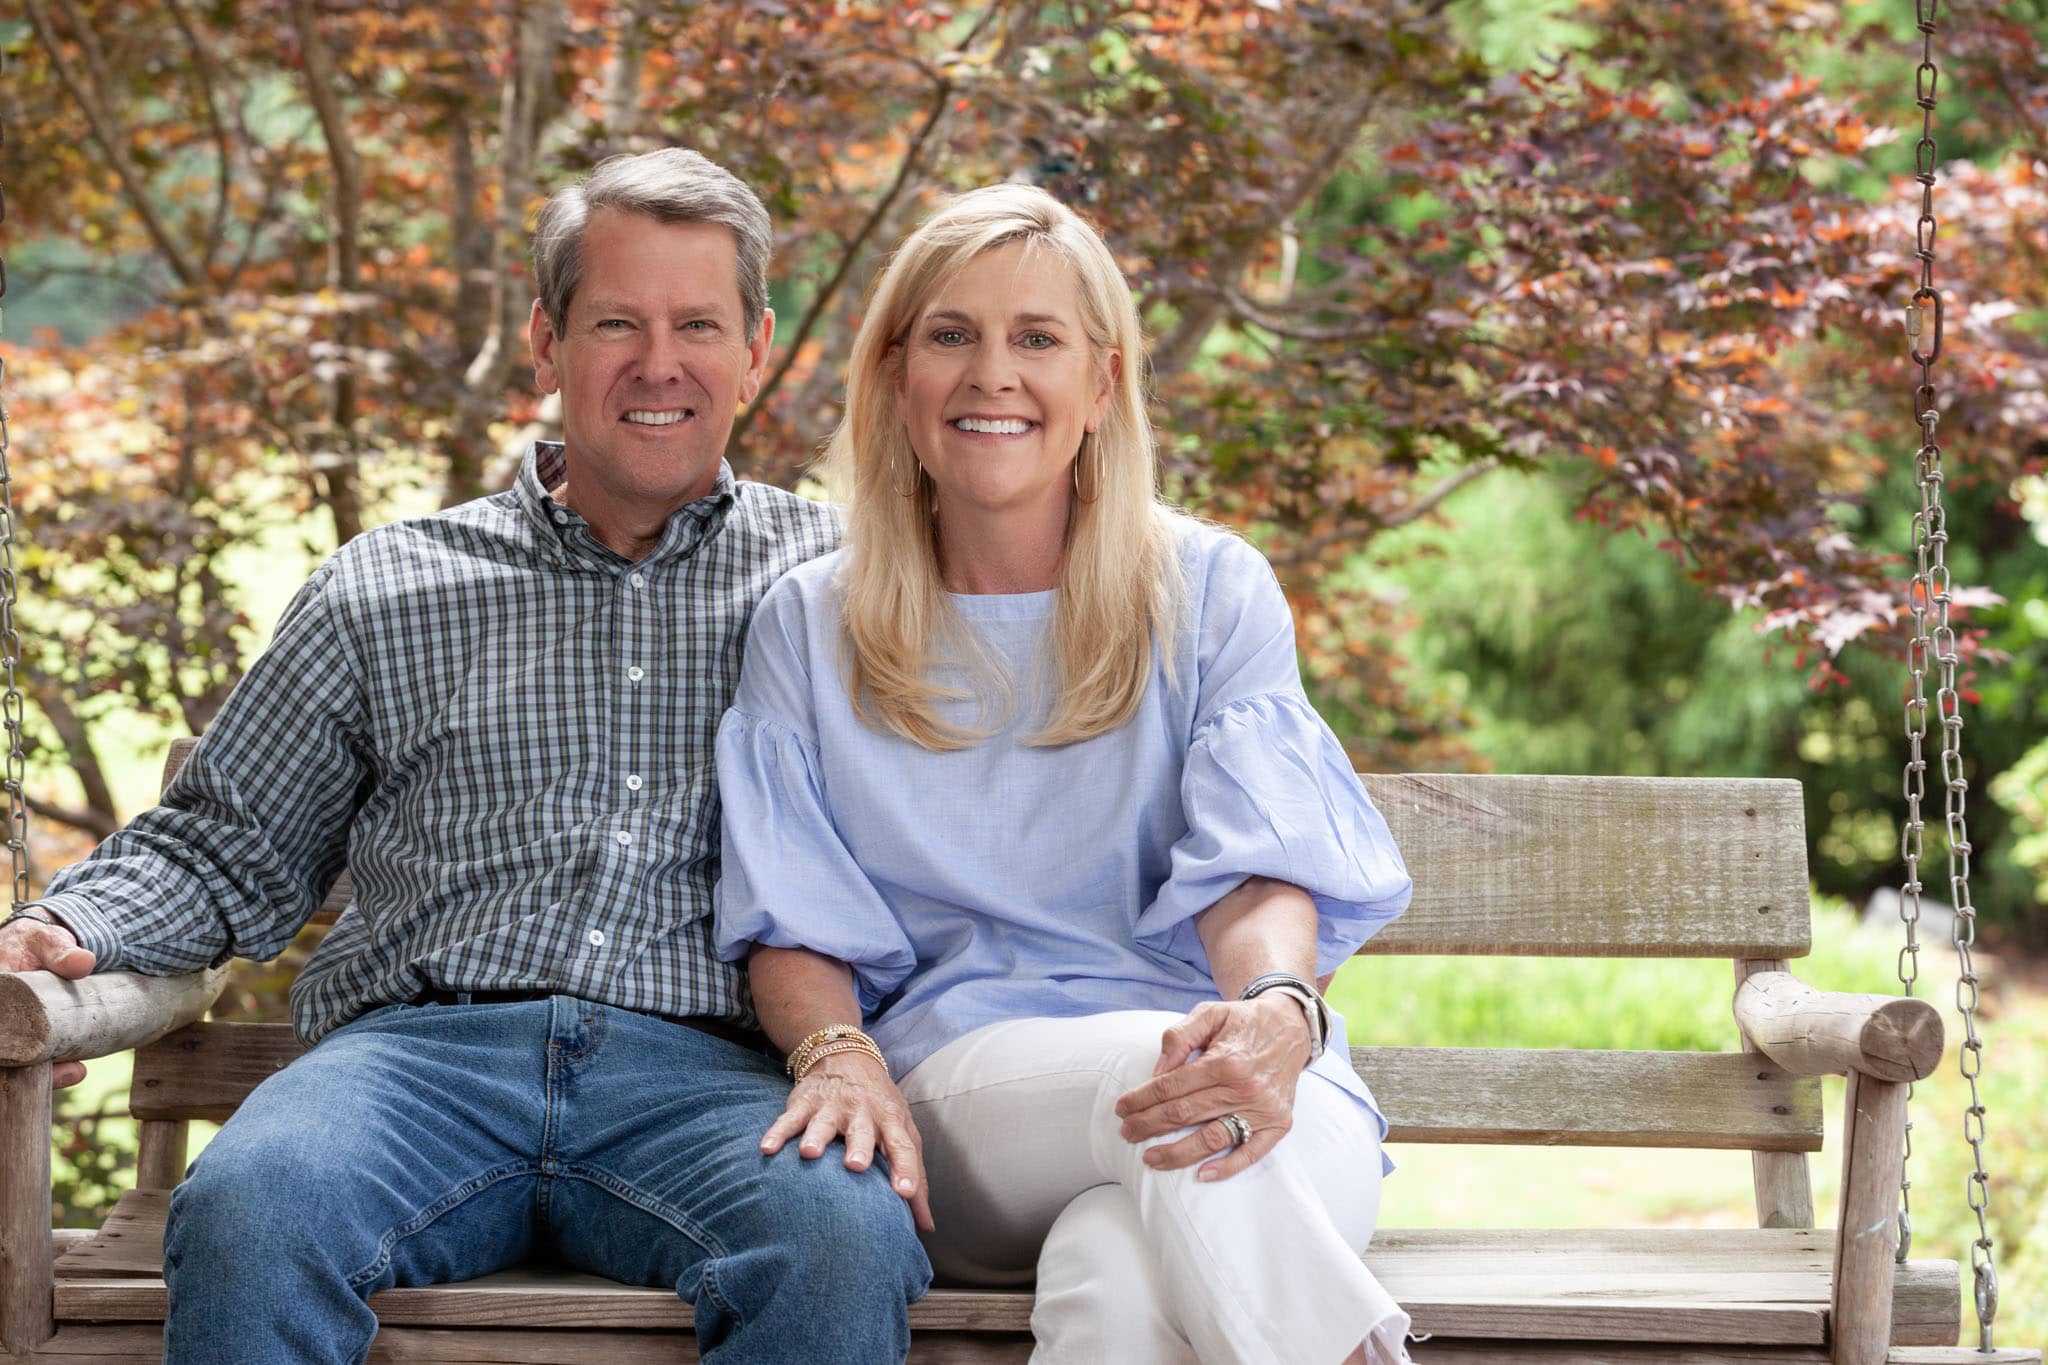 Georgia-Governor-Brian-Kemp-and-First-Lady-Marty-Kemp-sitting-next-to-each-other-and-smiling-in-a-porch-swing-at-their-home-in-Athens-Georgia.